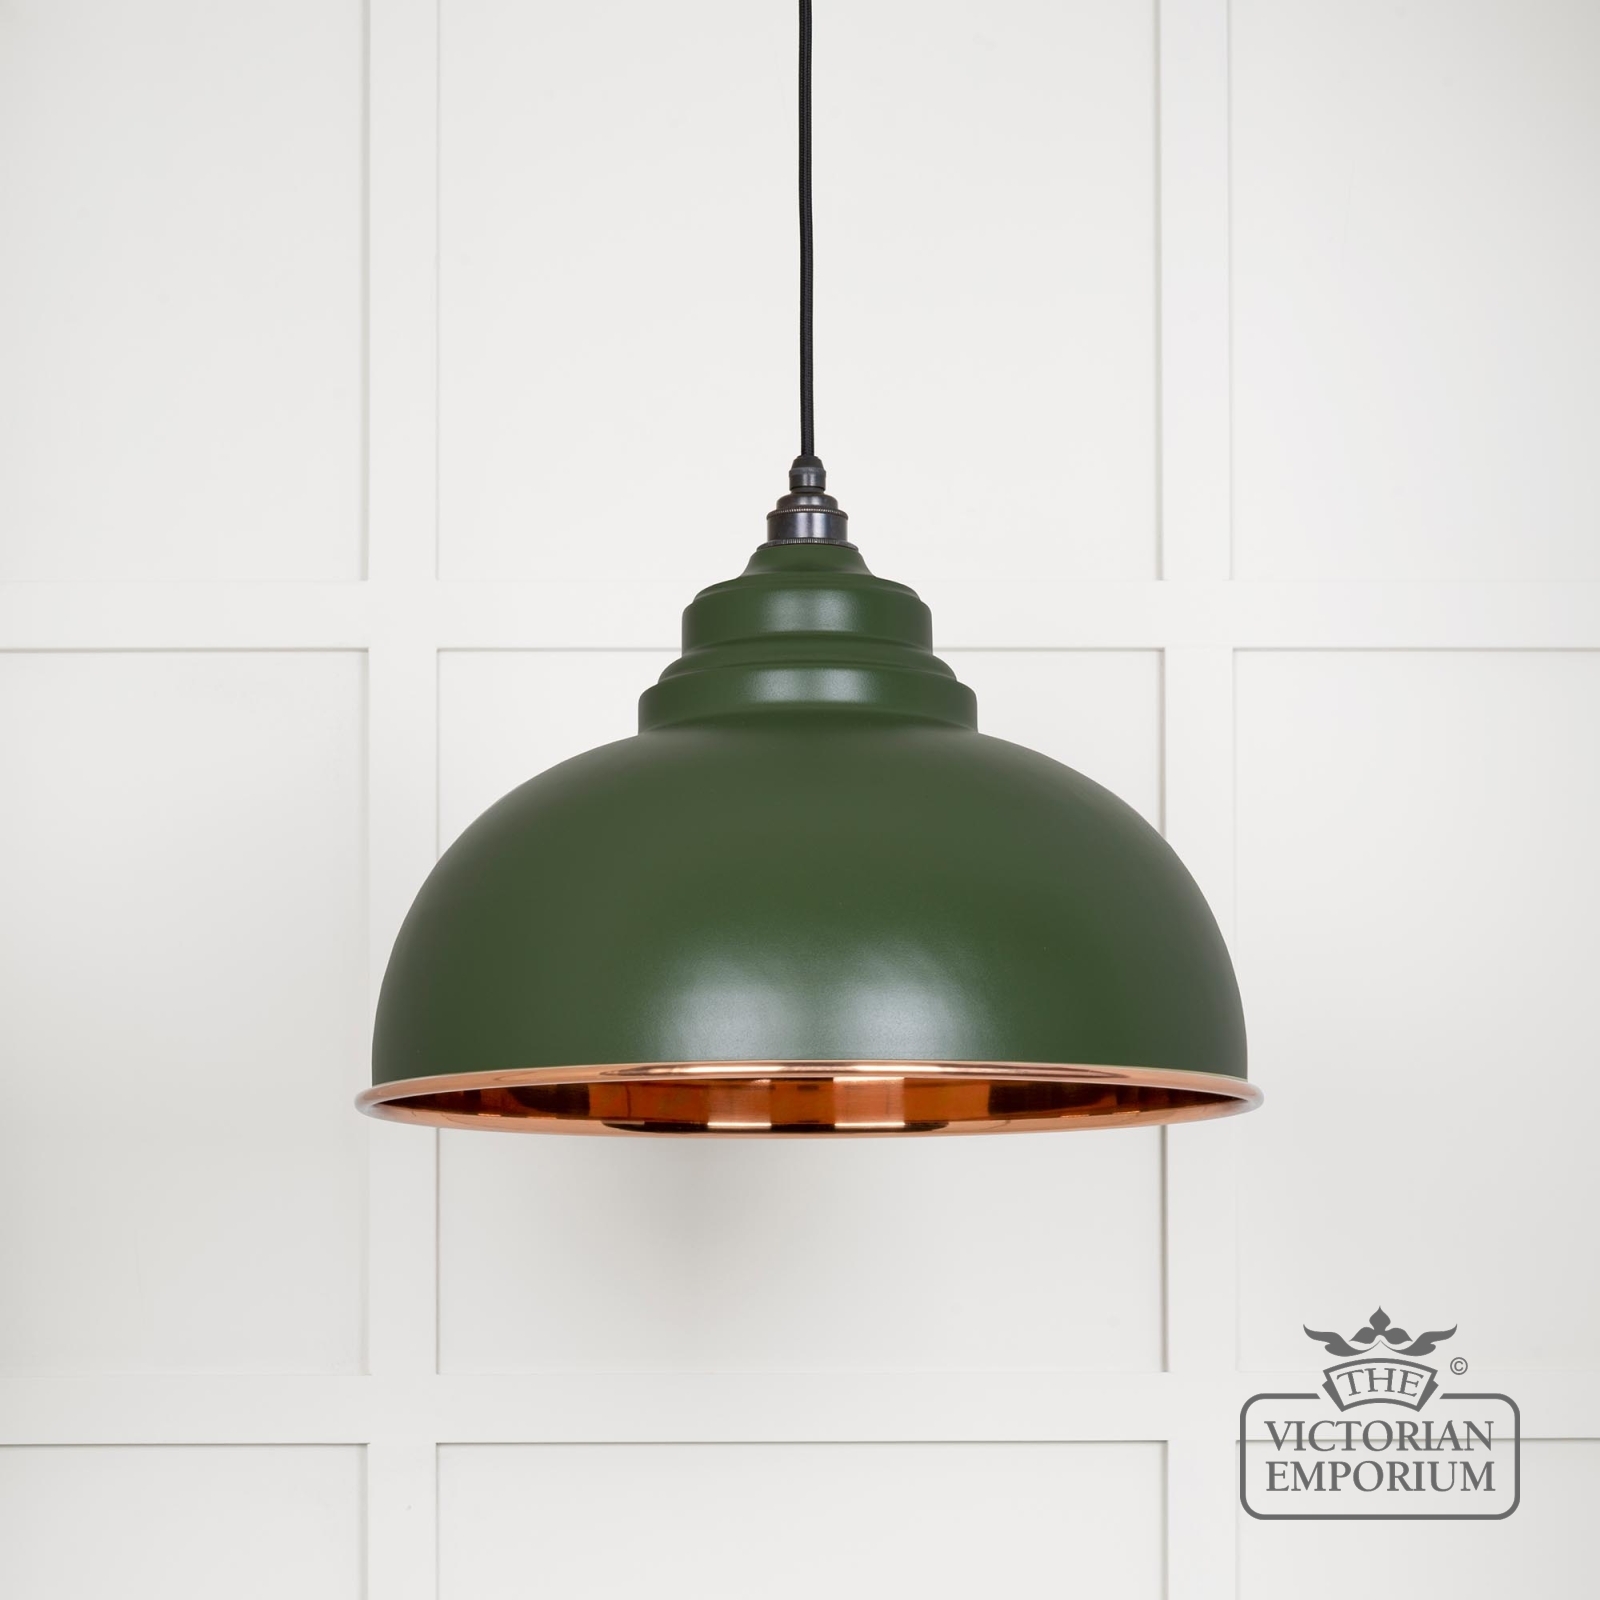 Harlow Pendant Light in Smooth Copper with Heath Exterior